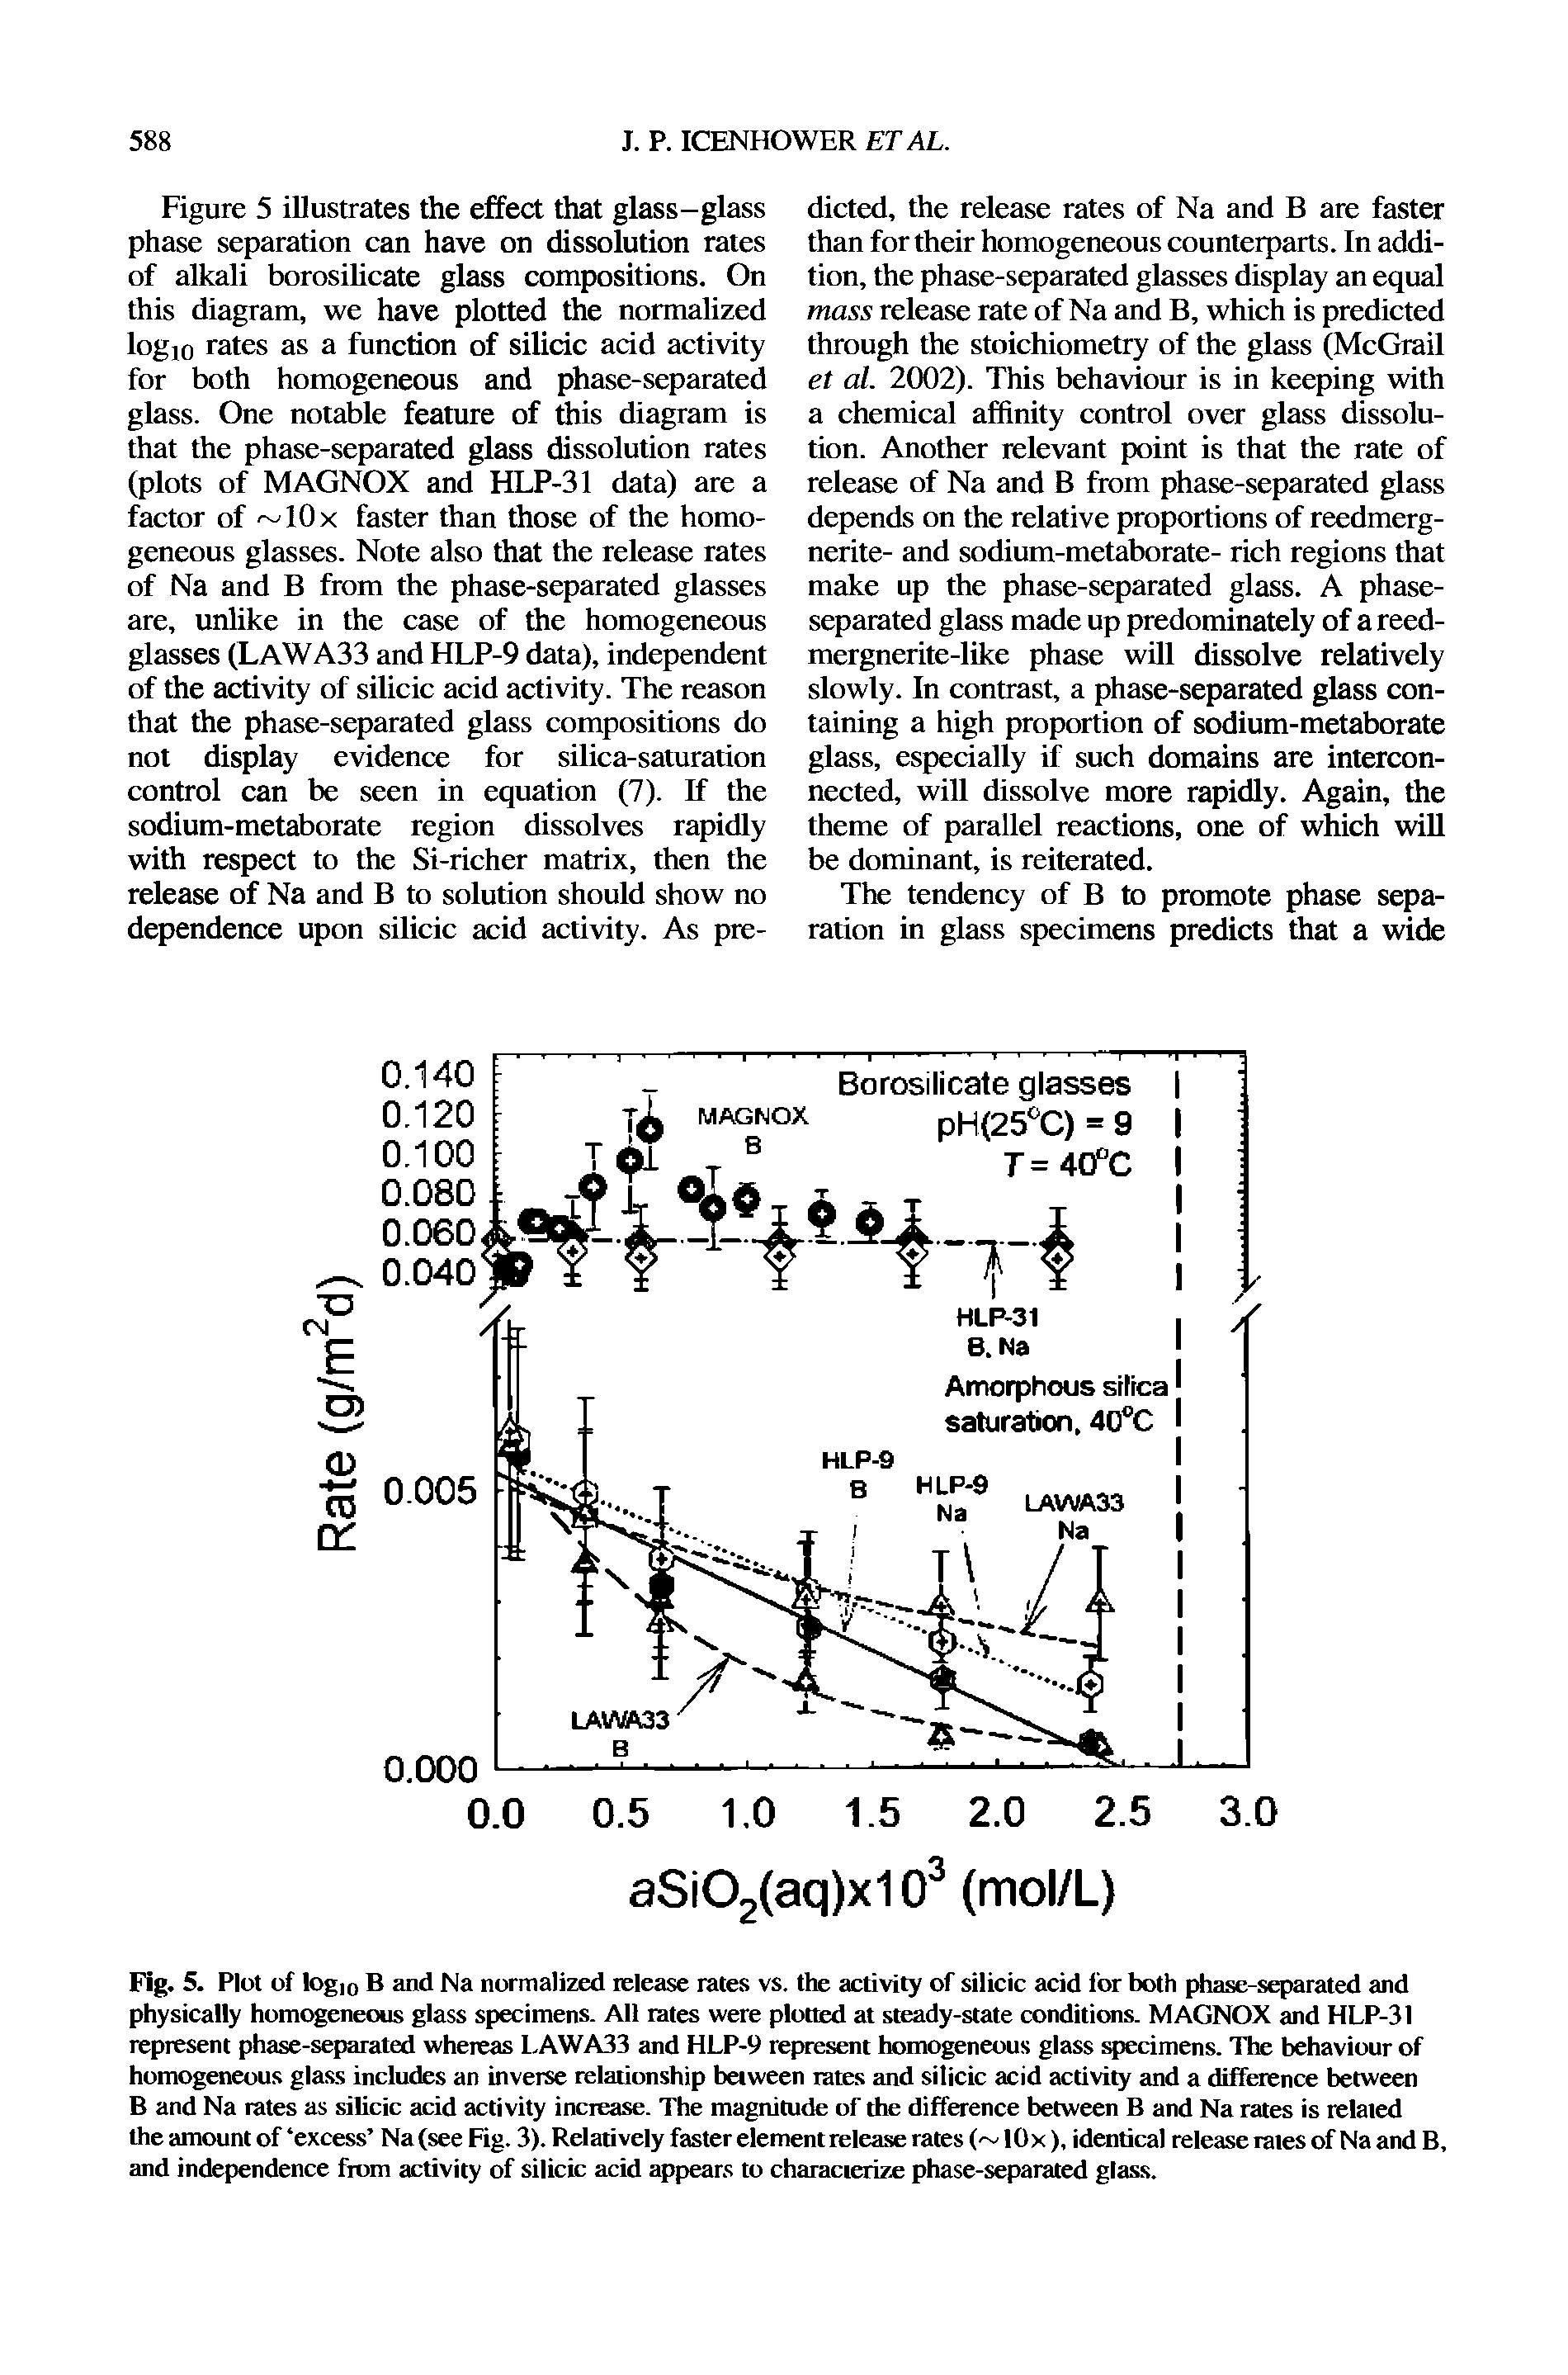 Fig. 5. Plot of logm B and Na normalized release rates vs. the activity of silicic acid for both phase-separated and physically homogeneous glass specimens. All rates were plotted at steady-state conditions. MAGNOX and HLP-31 represent phase-separated whereas LAWA33 and HLP-9 represent homogeneous glass specimens. The behaviour of homogeneous glass includes an inverse relationship between rates and silicic acid activity and a difference between B and Na rates as silicic acid activity increase. The magnitude of the difference between B and Na rates is related the amount of excess Na (see Fig. 3). Relatively faster element release rates ( lOx), identical release rales of Na and B, and independence from activity of silicic acid appears to characterize phase-separated glass.